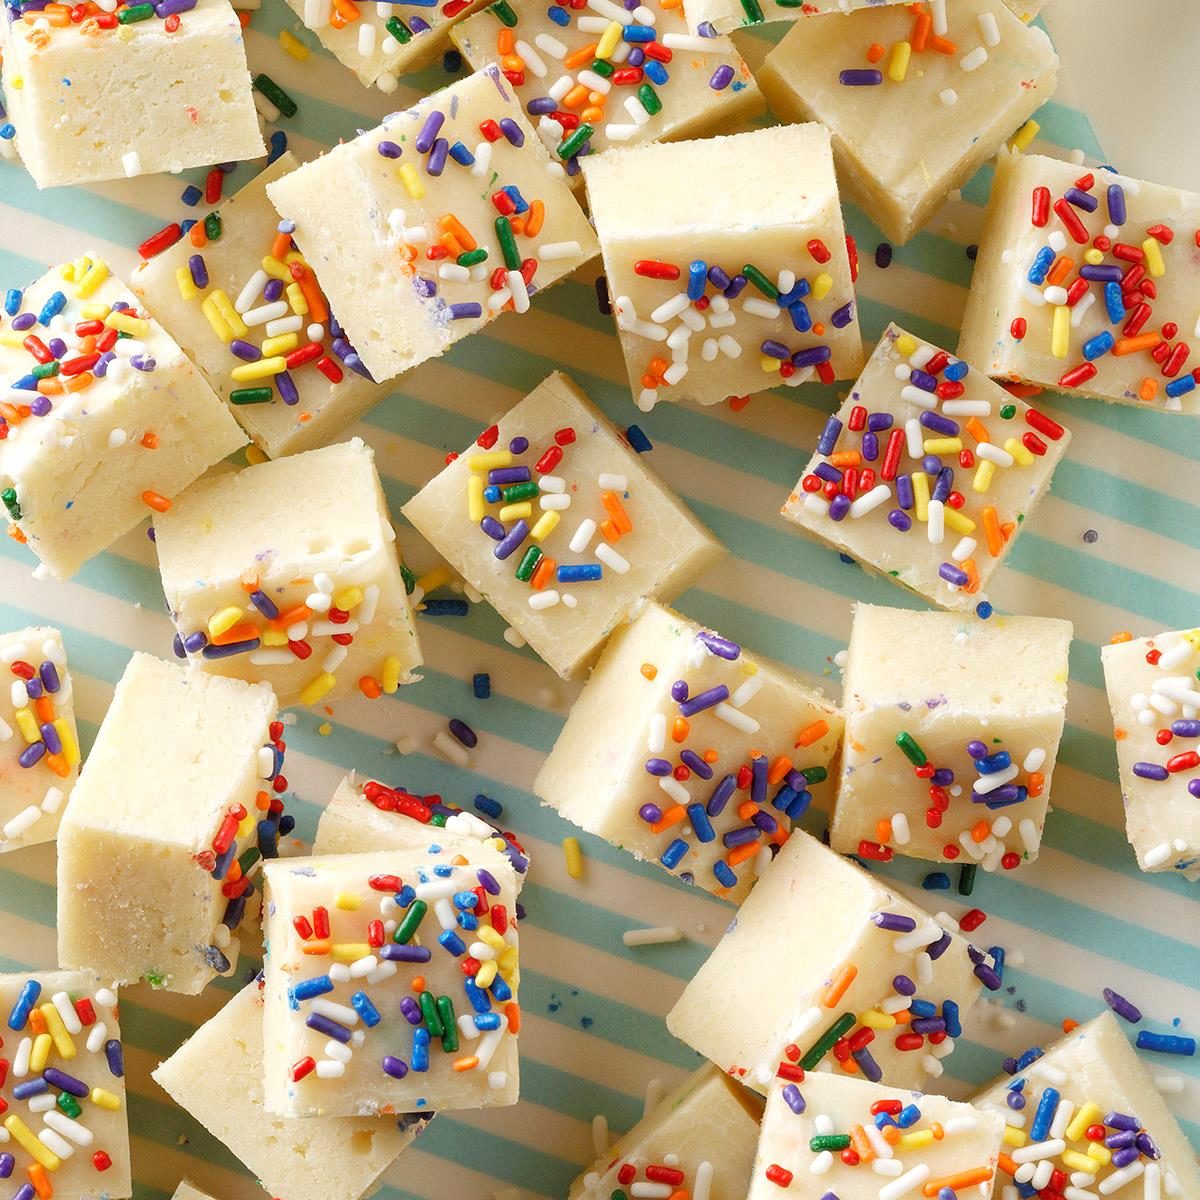 20 Easy Candy Making Recipes for Beginners